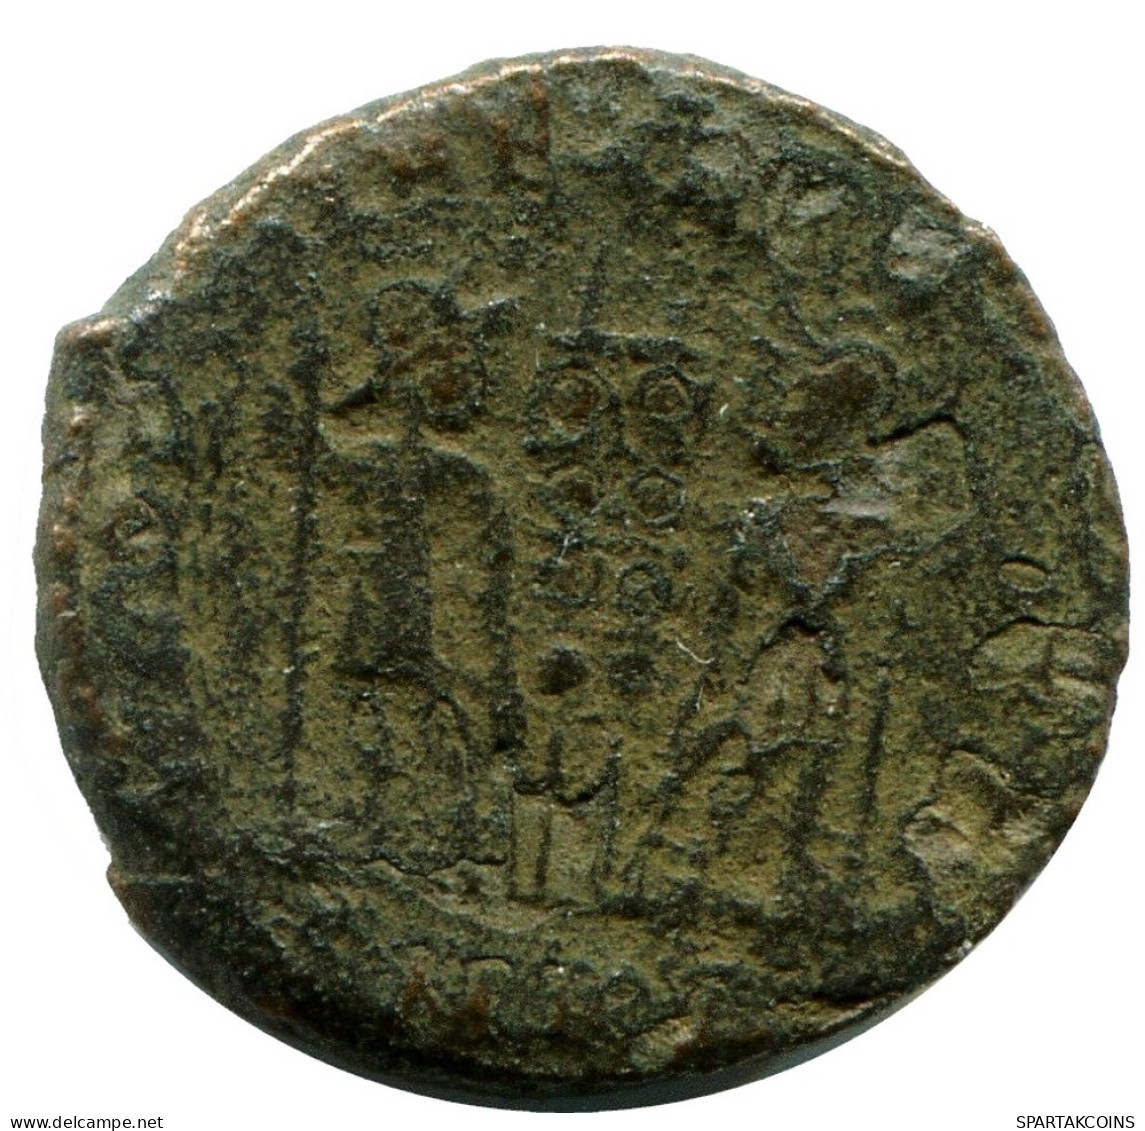 CONSTANTINE I MINTED IN CYZICUS FOUND IN IHNASYAH HOARD EGYPT #ANC11003.14.F.A - L'Empire Chrétien (307 à 363)